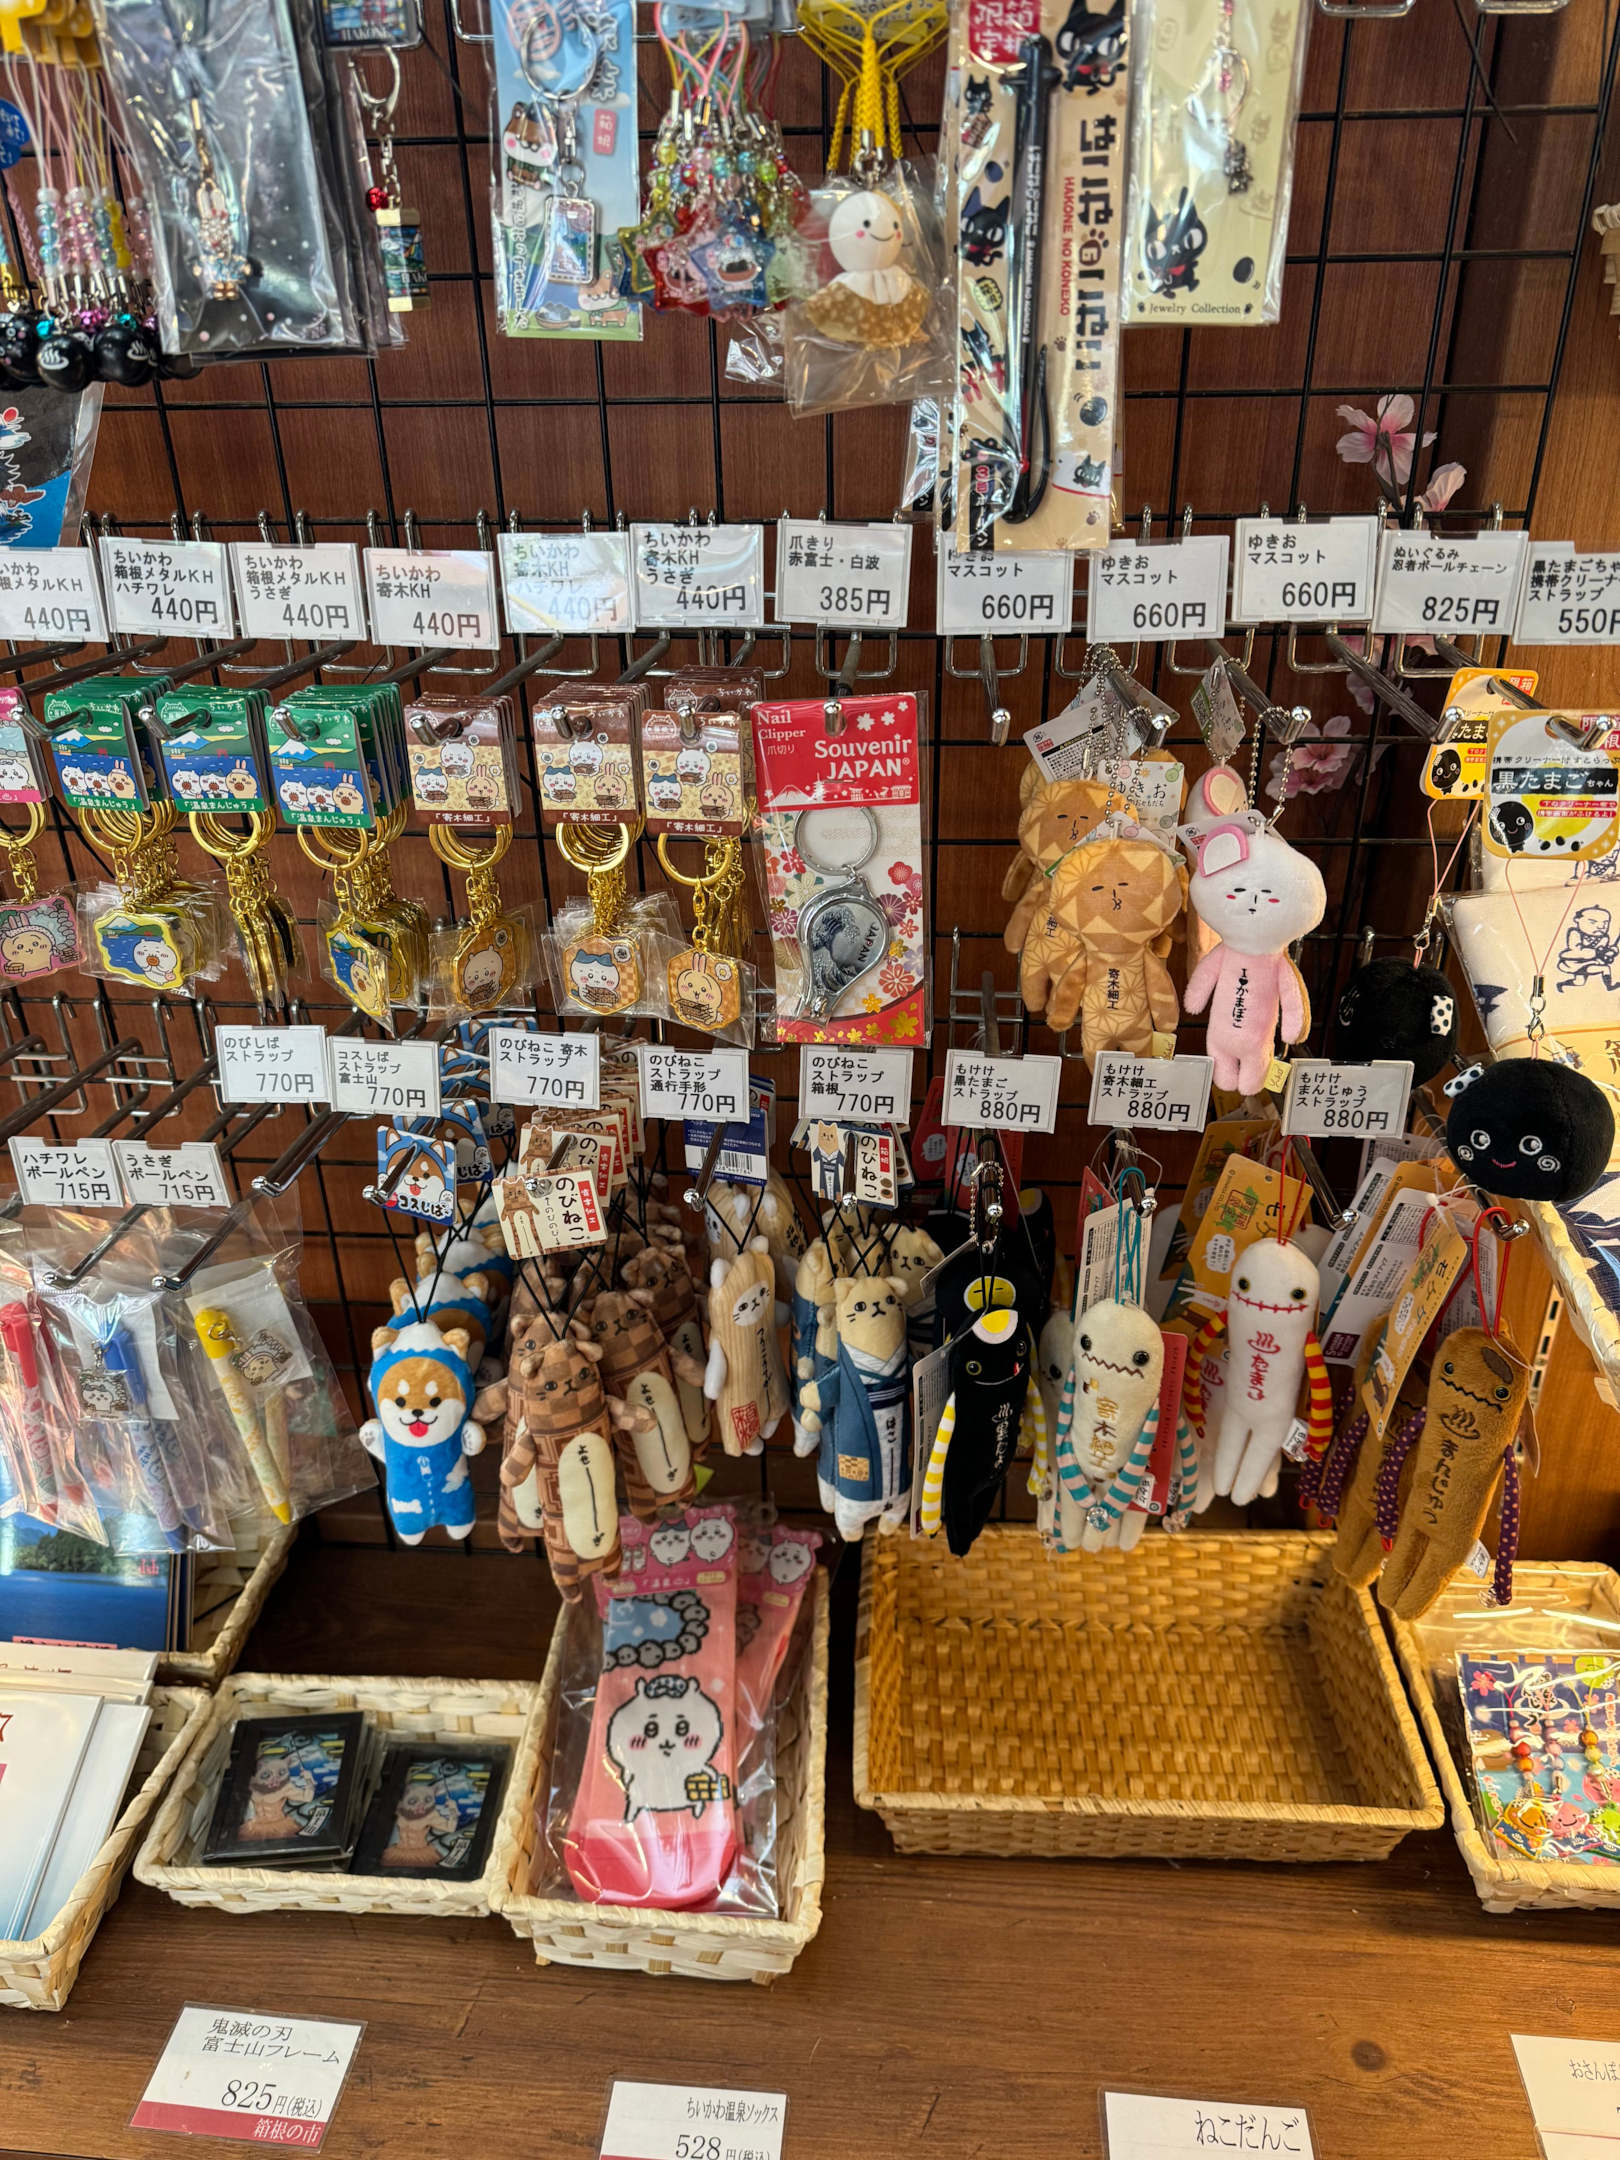 Mascot keychains in a souvenir store in Japan